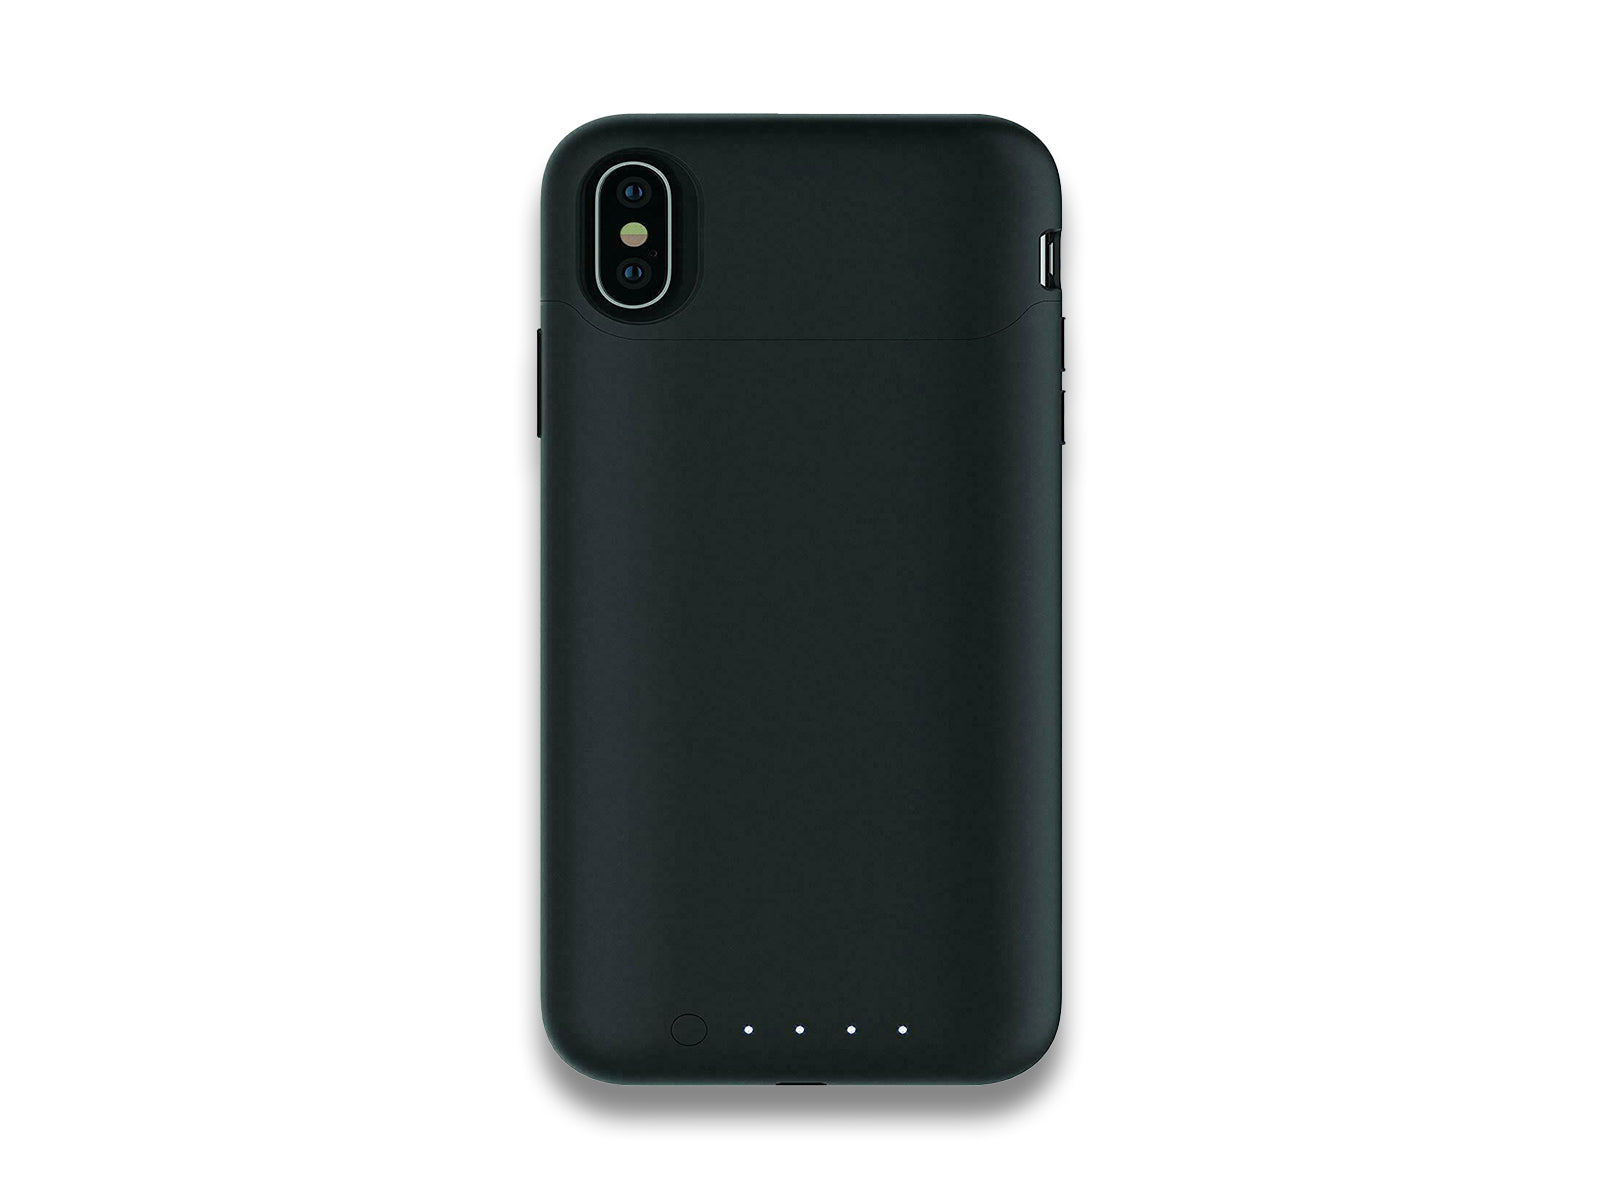 Image shows back view of phone case on white background